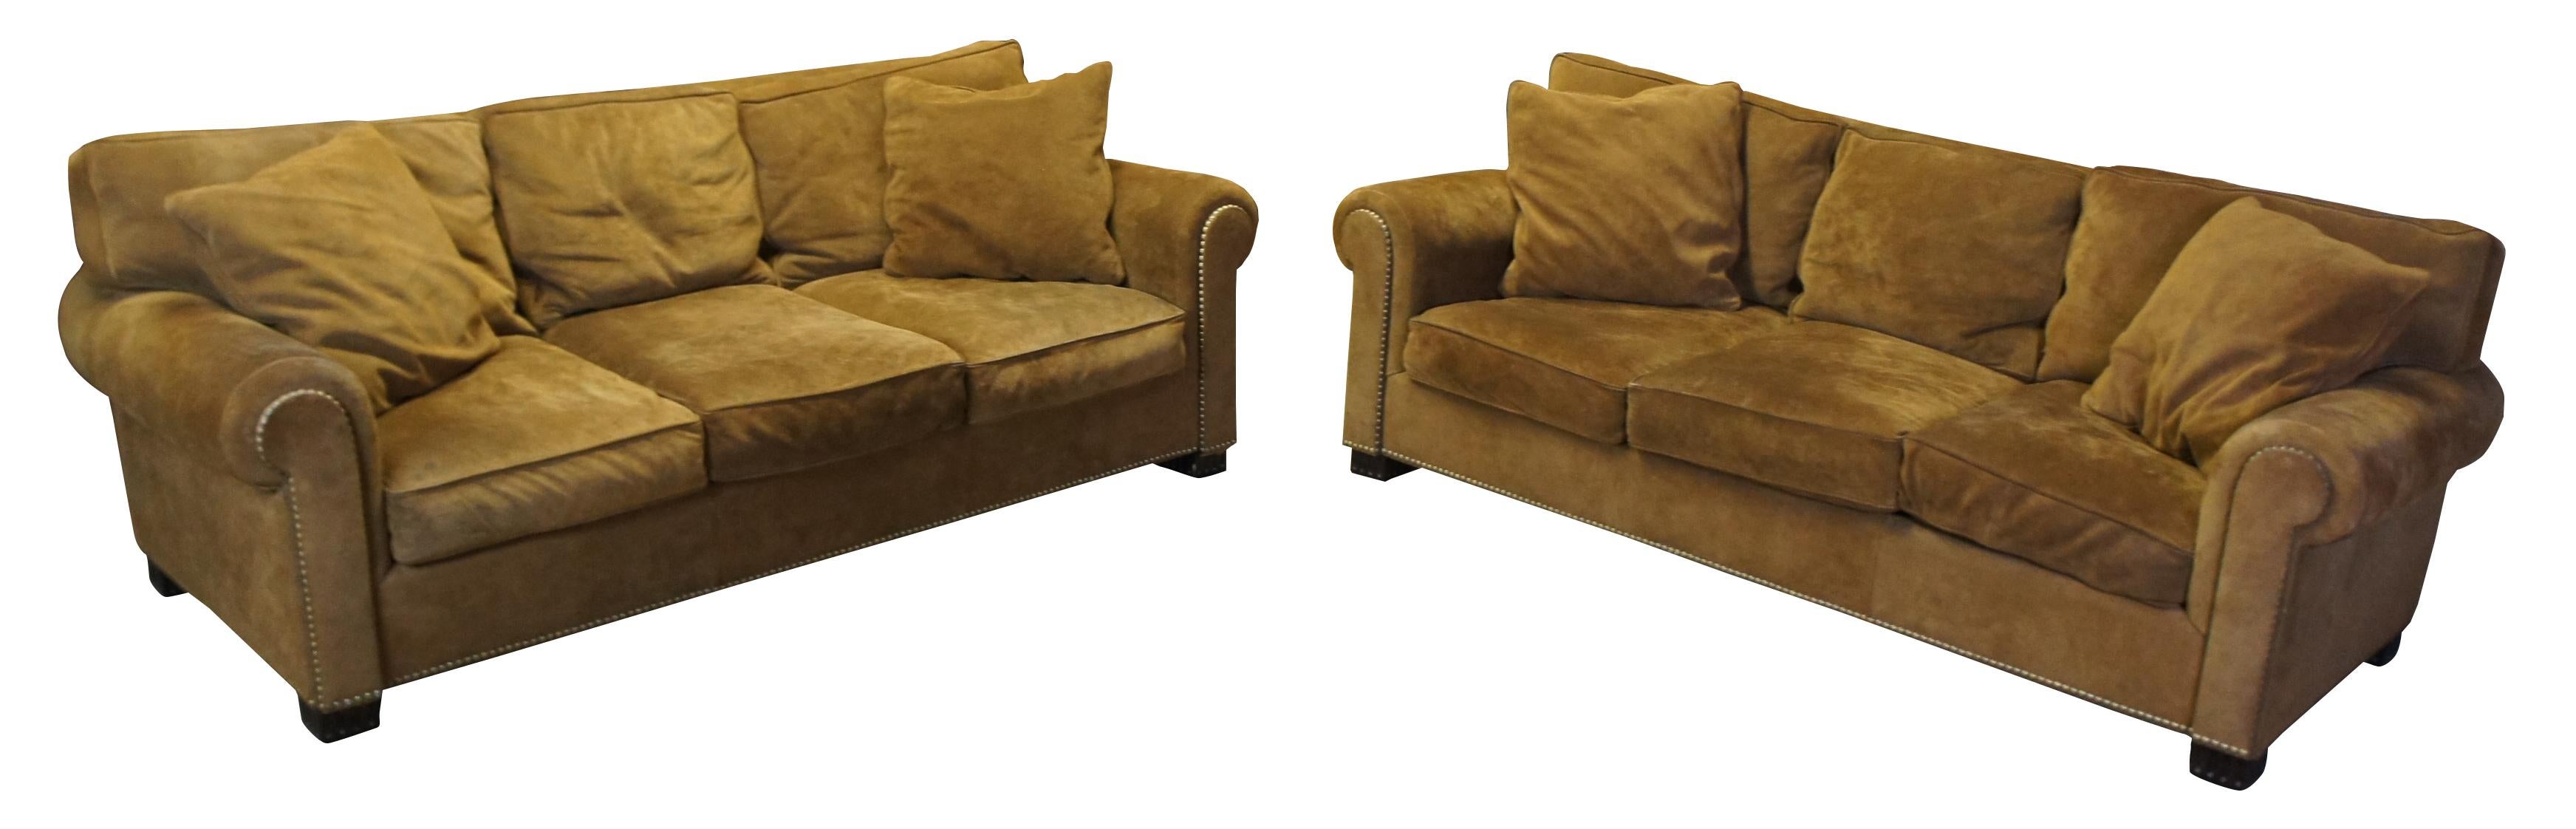 Pair of two vintage Ralph Lauren Henredon Jamaica Salon three seat sofas. Inspired by elegant island living, the Jamaica salon sofa provides plush, comfortable seating with a small-scale profile. Resting on low reeded block feet with gentle roll